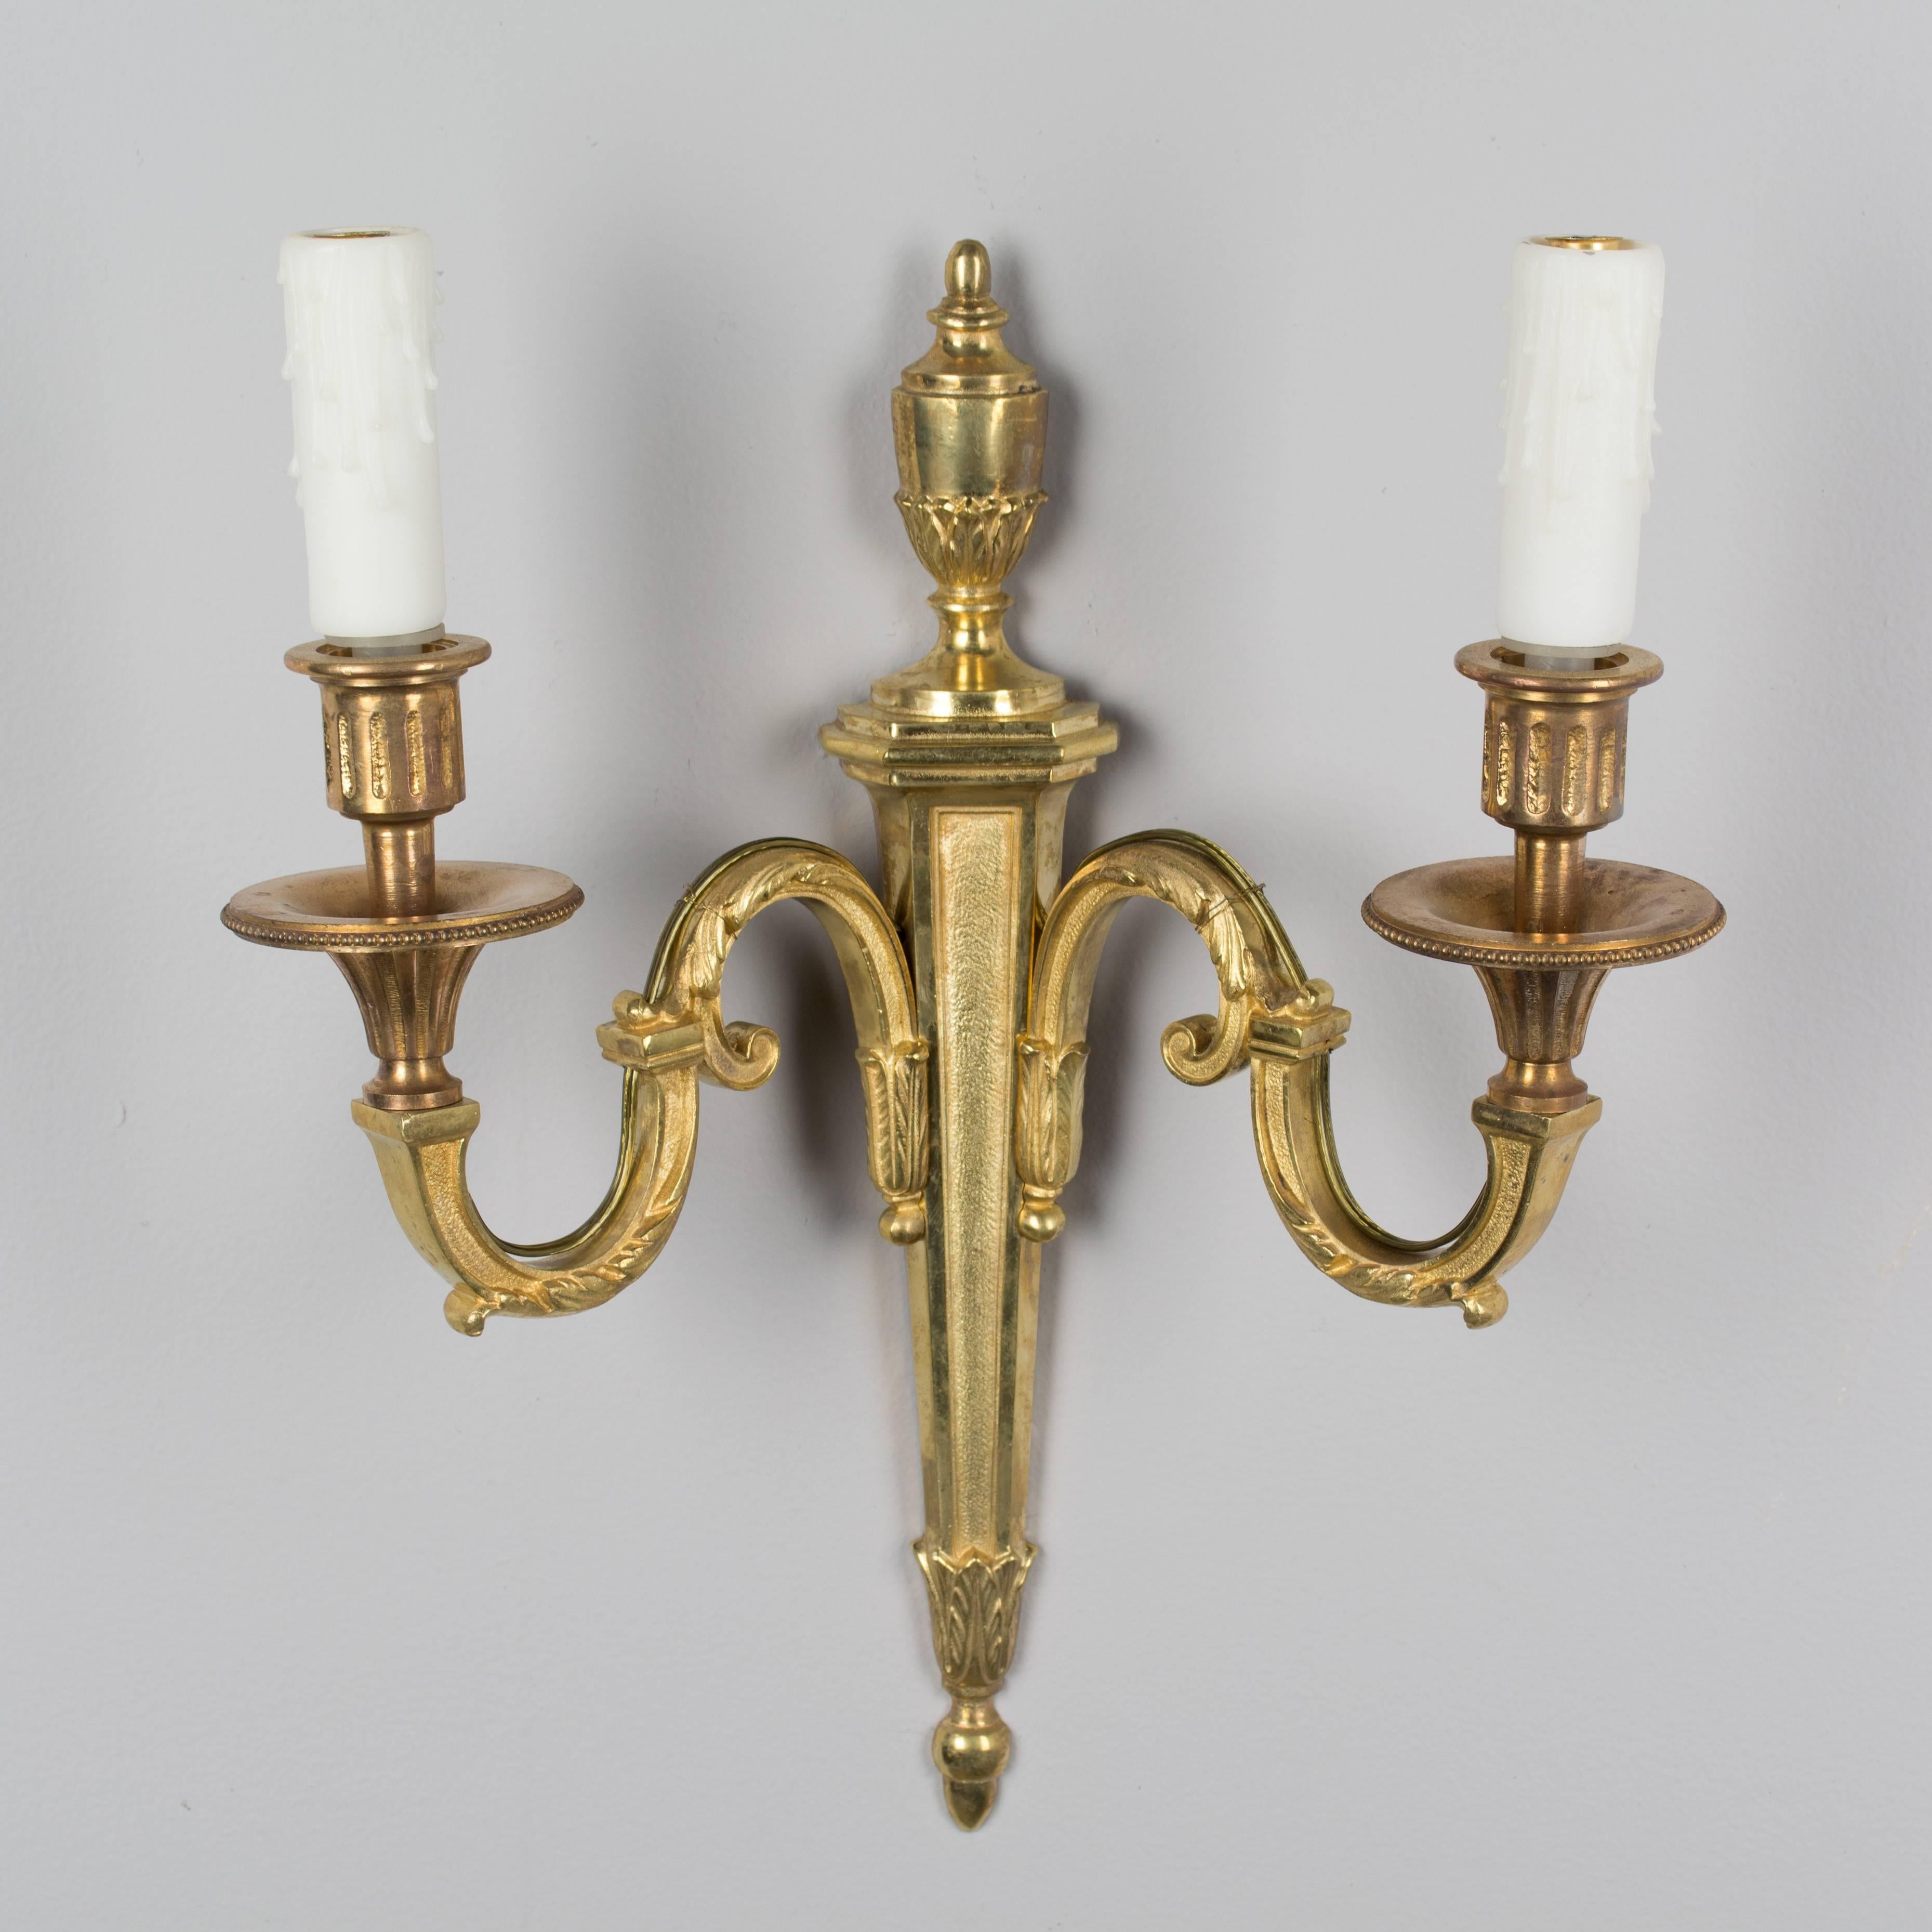 Cast Pair of Louis XVI Style French Sconces